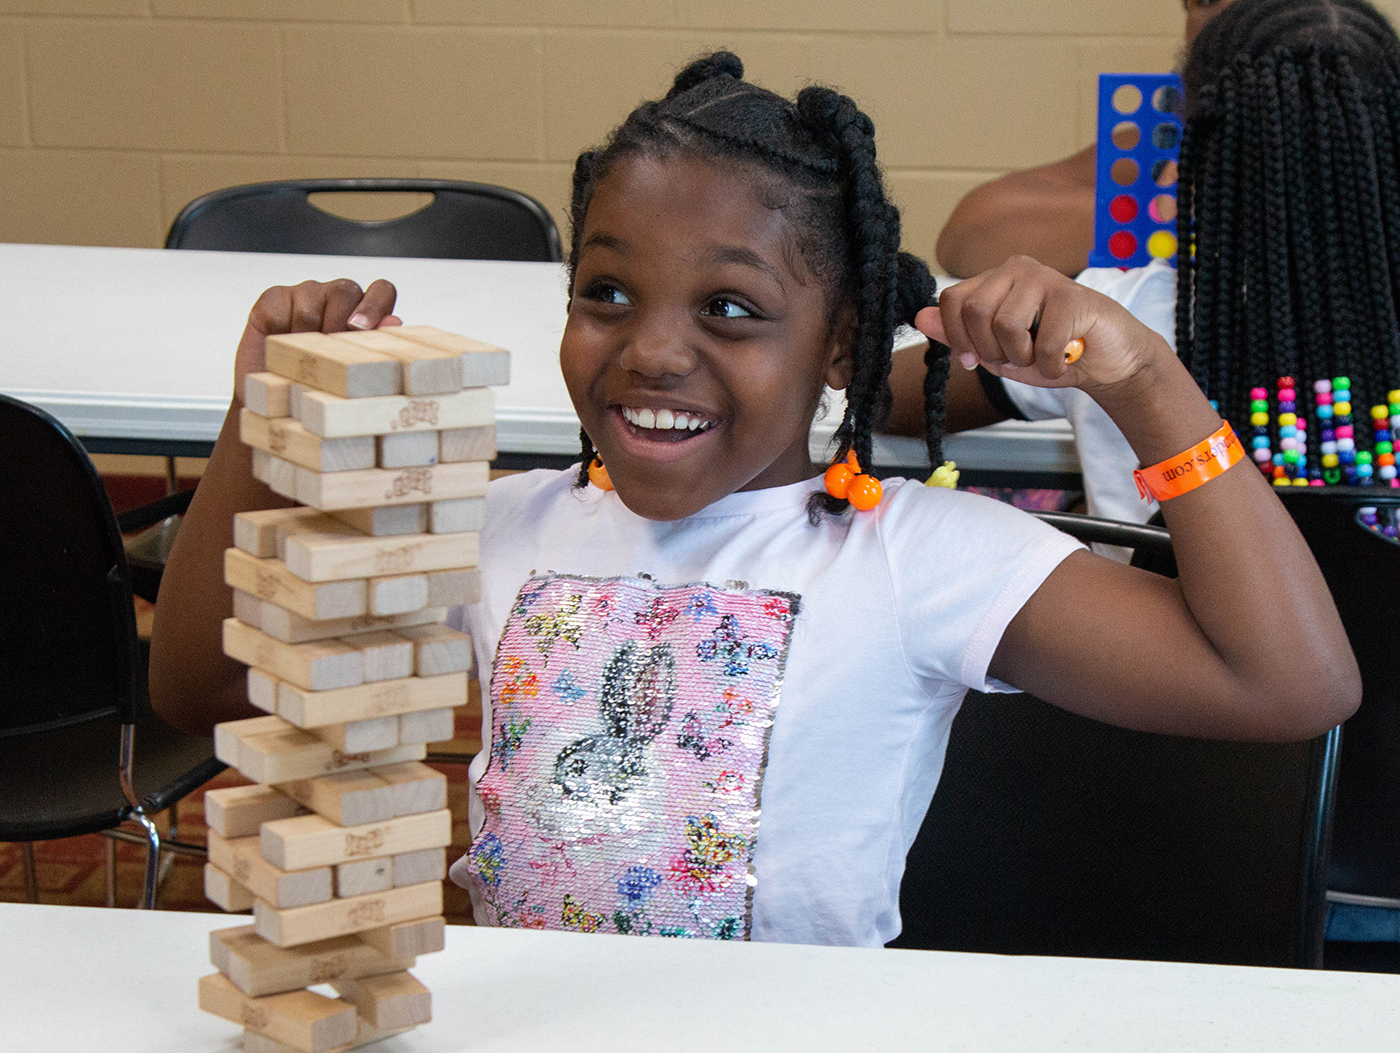 Young girls raises her fists in triumph after successfully removing a game peace from the base of a Jenga game tower and while not toppling it to the table.